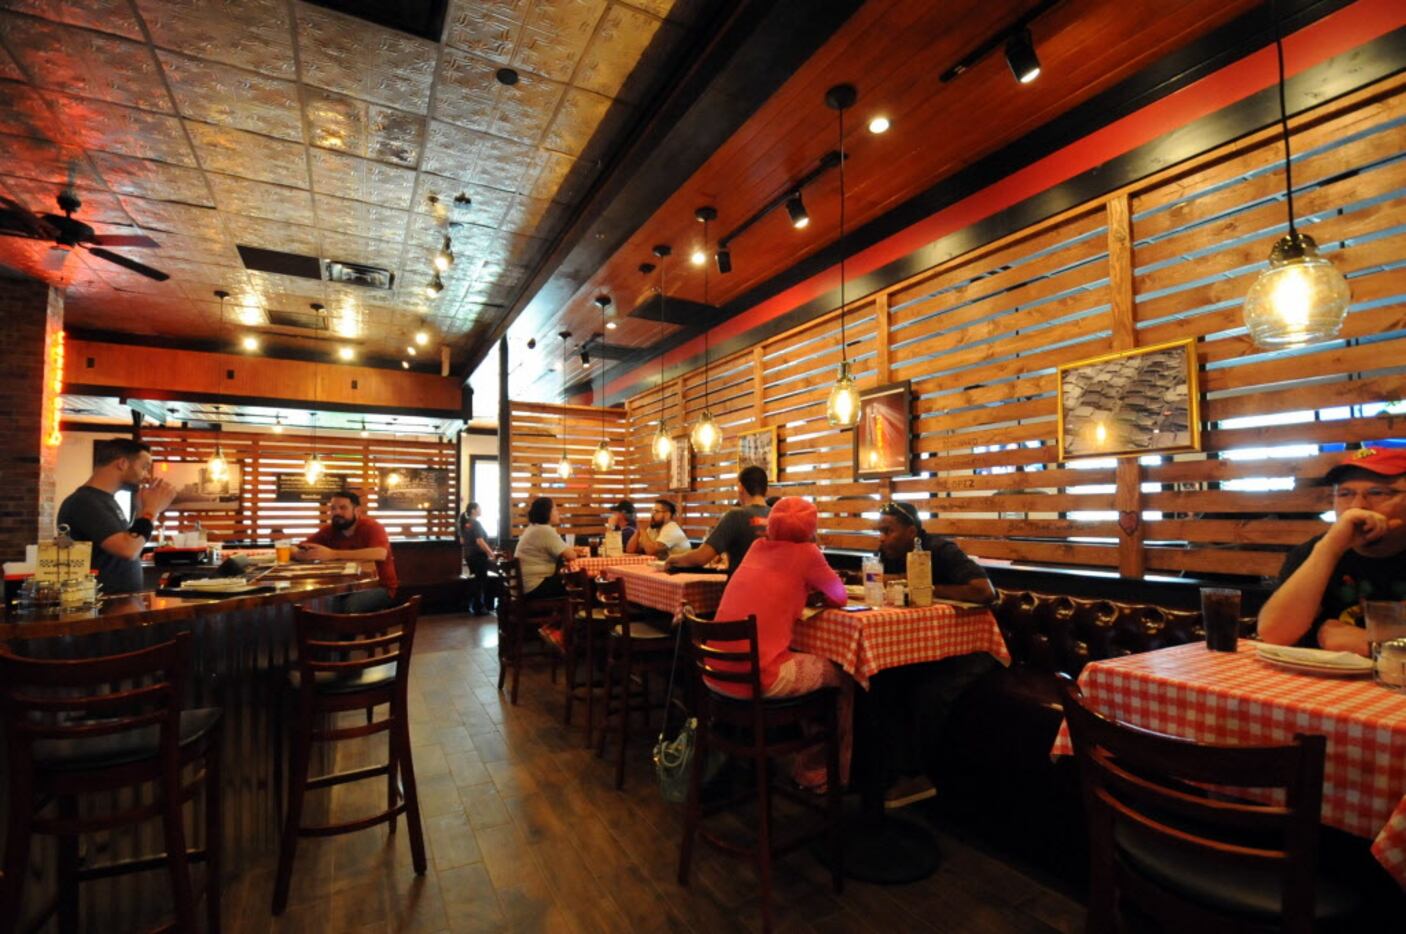 The restaurant serves specialty deep dish pizza, thin crust, salads and sandwiches at Gino's...